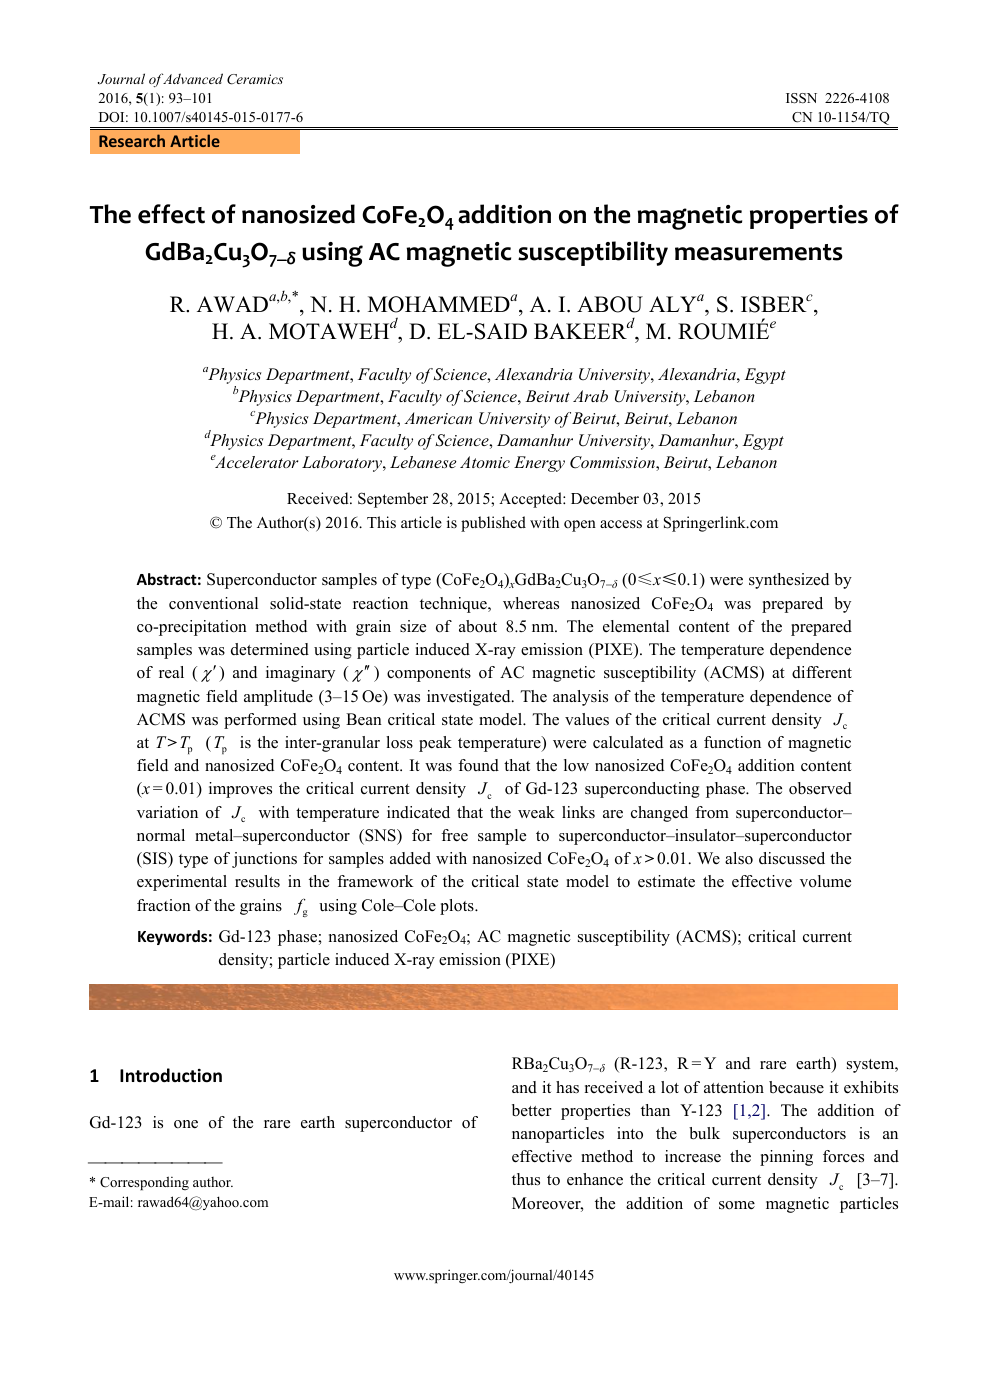 The Effect Of Nanosized Cofe2o4 Addition On The Magnetic Properties Of Gdba2cu3o7 D Using Ac Magnetic Susceptibility Measurements Topic Of Research Paper In Physical Sciences Download Scholarly Article Pdf And Read For